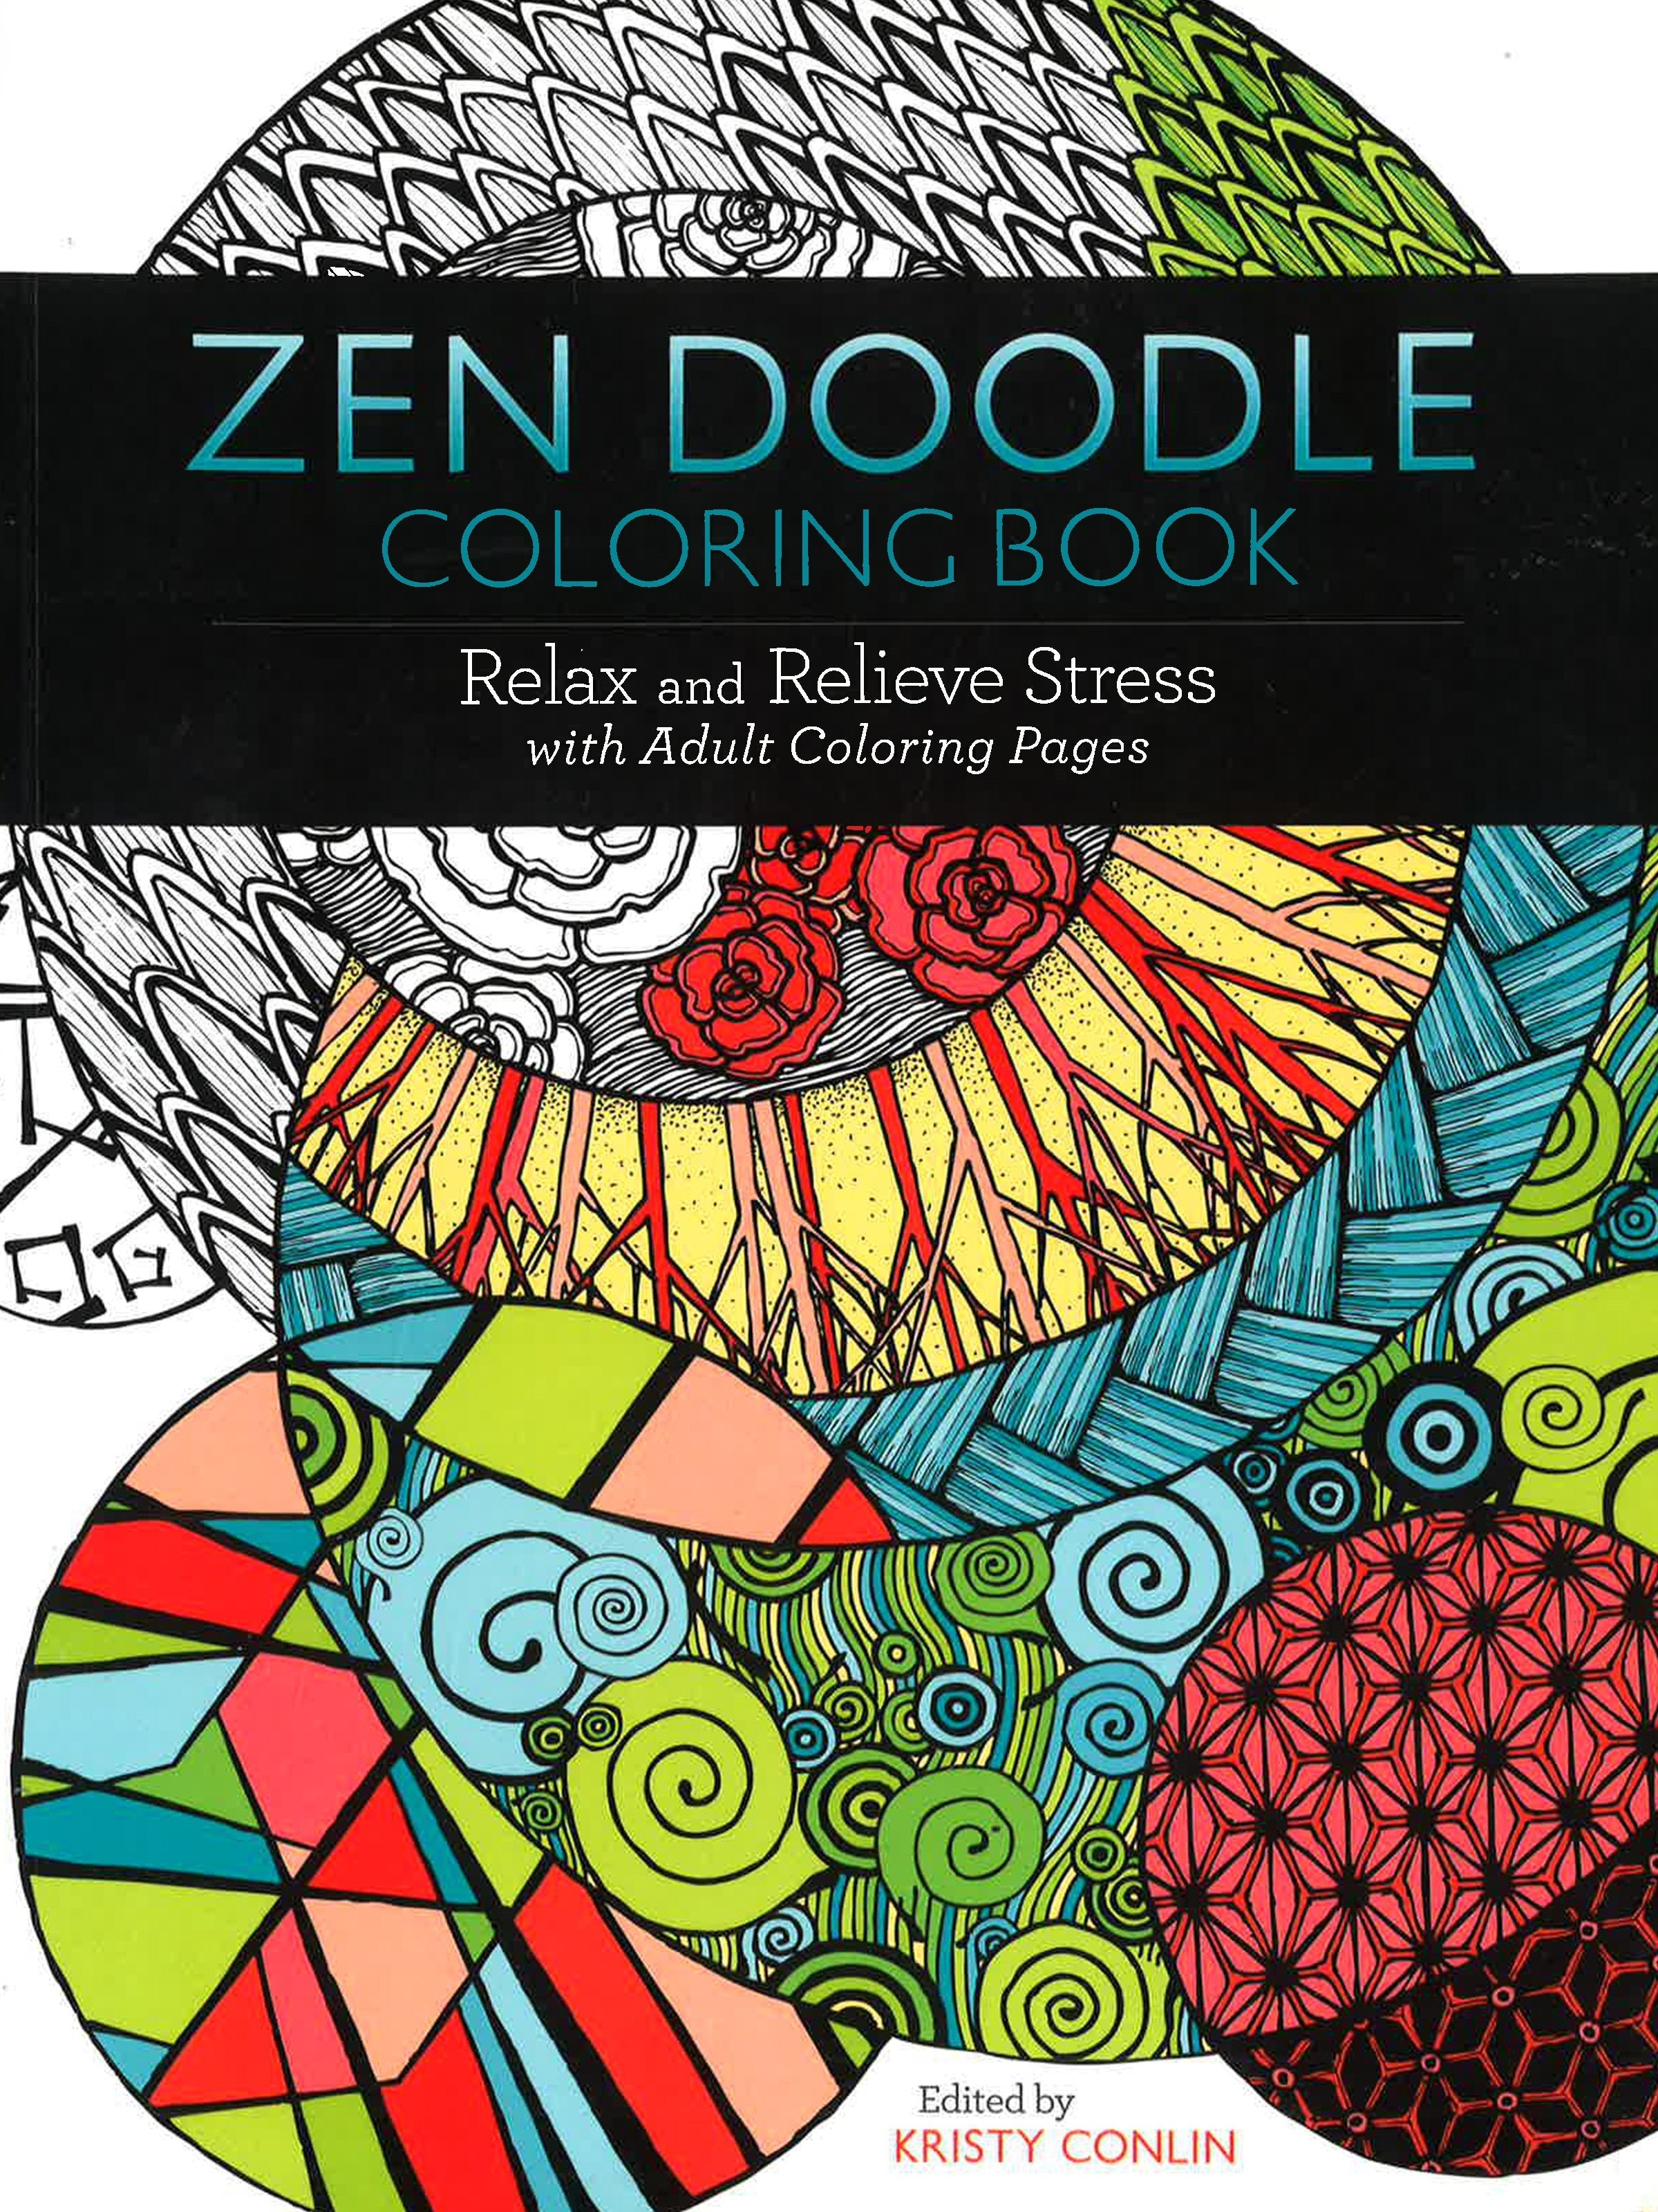 Tracing Book for Adults: Oodles of Doodles: Stress relief and relaxation:  Mindful tracing and colouring book for adults full of doodles, robots, and